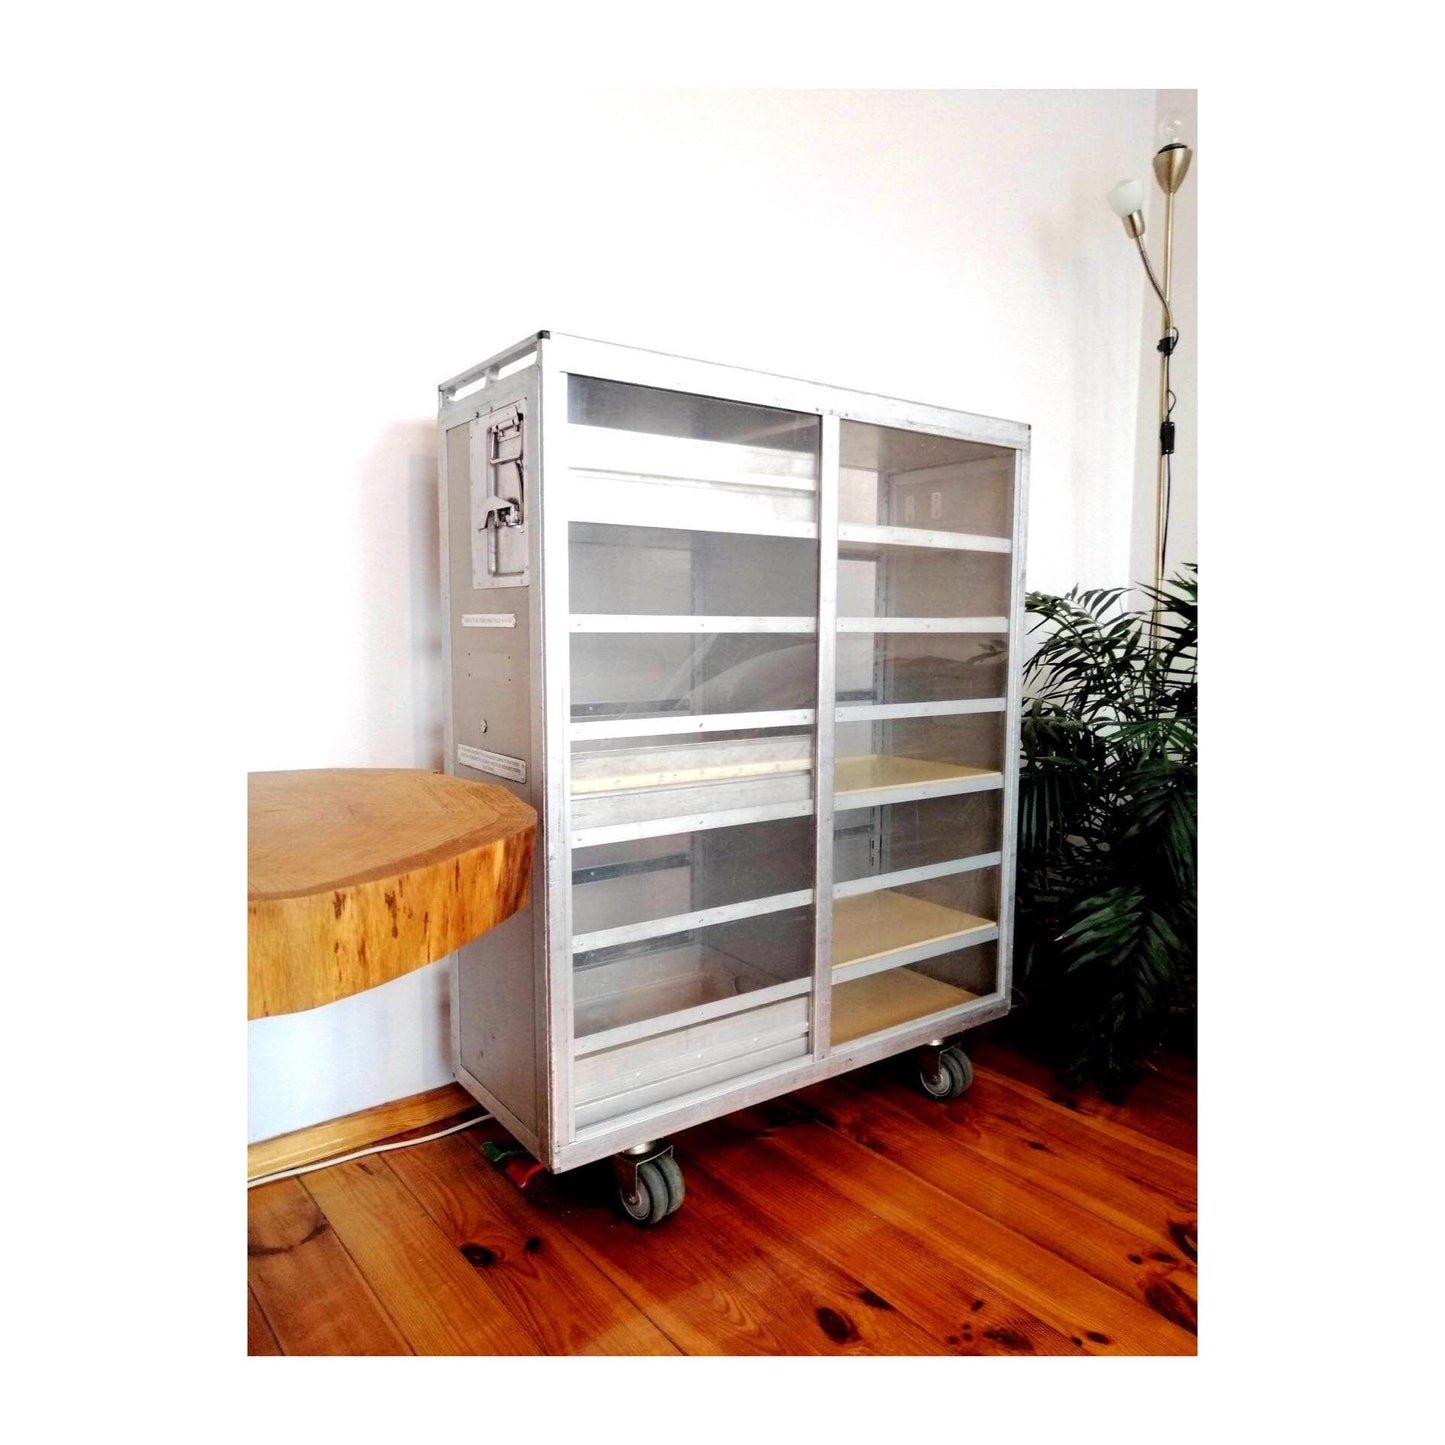 Airline Inflight Sales Cart | Aircraft Trolley Driessen | Showcase Aviation Cart with Accessories | Worldwide Shipping